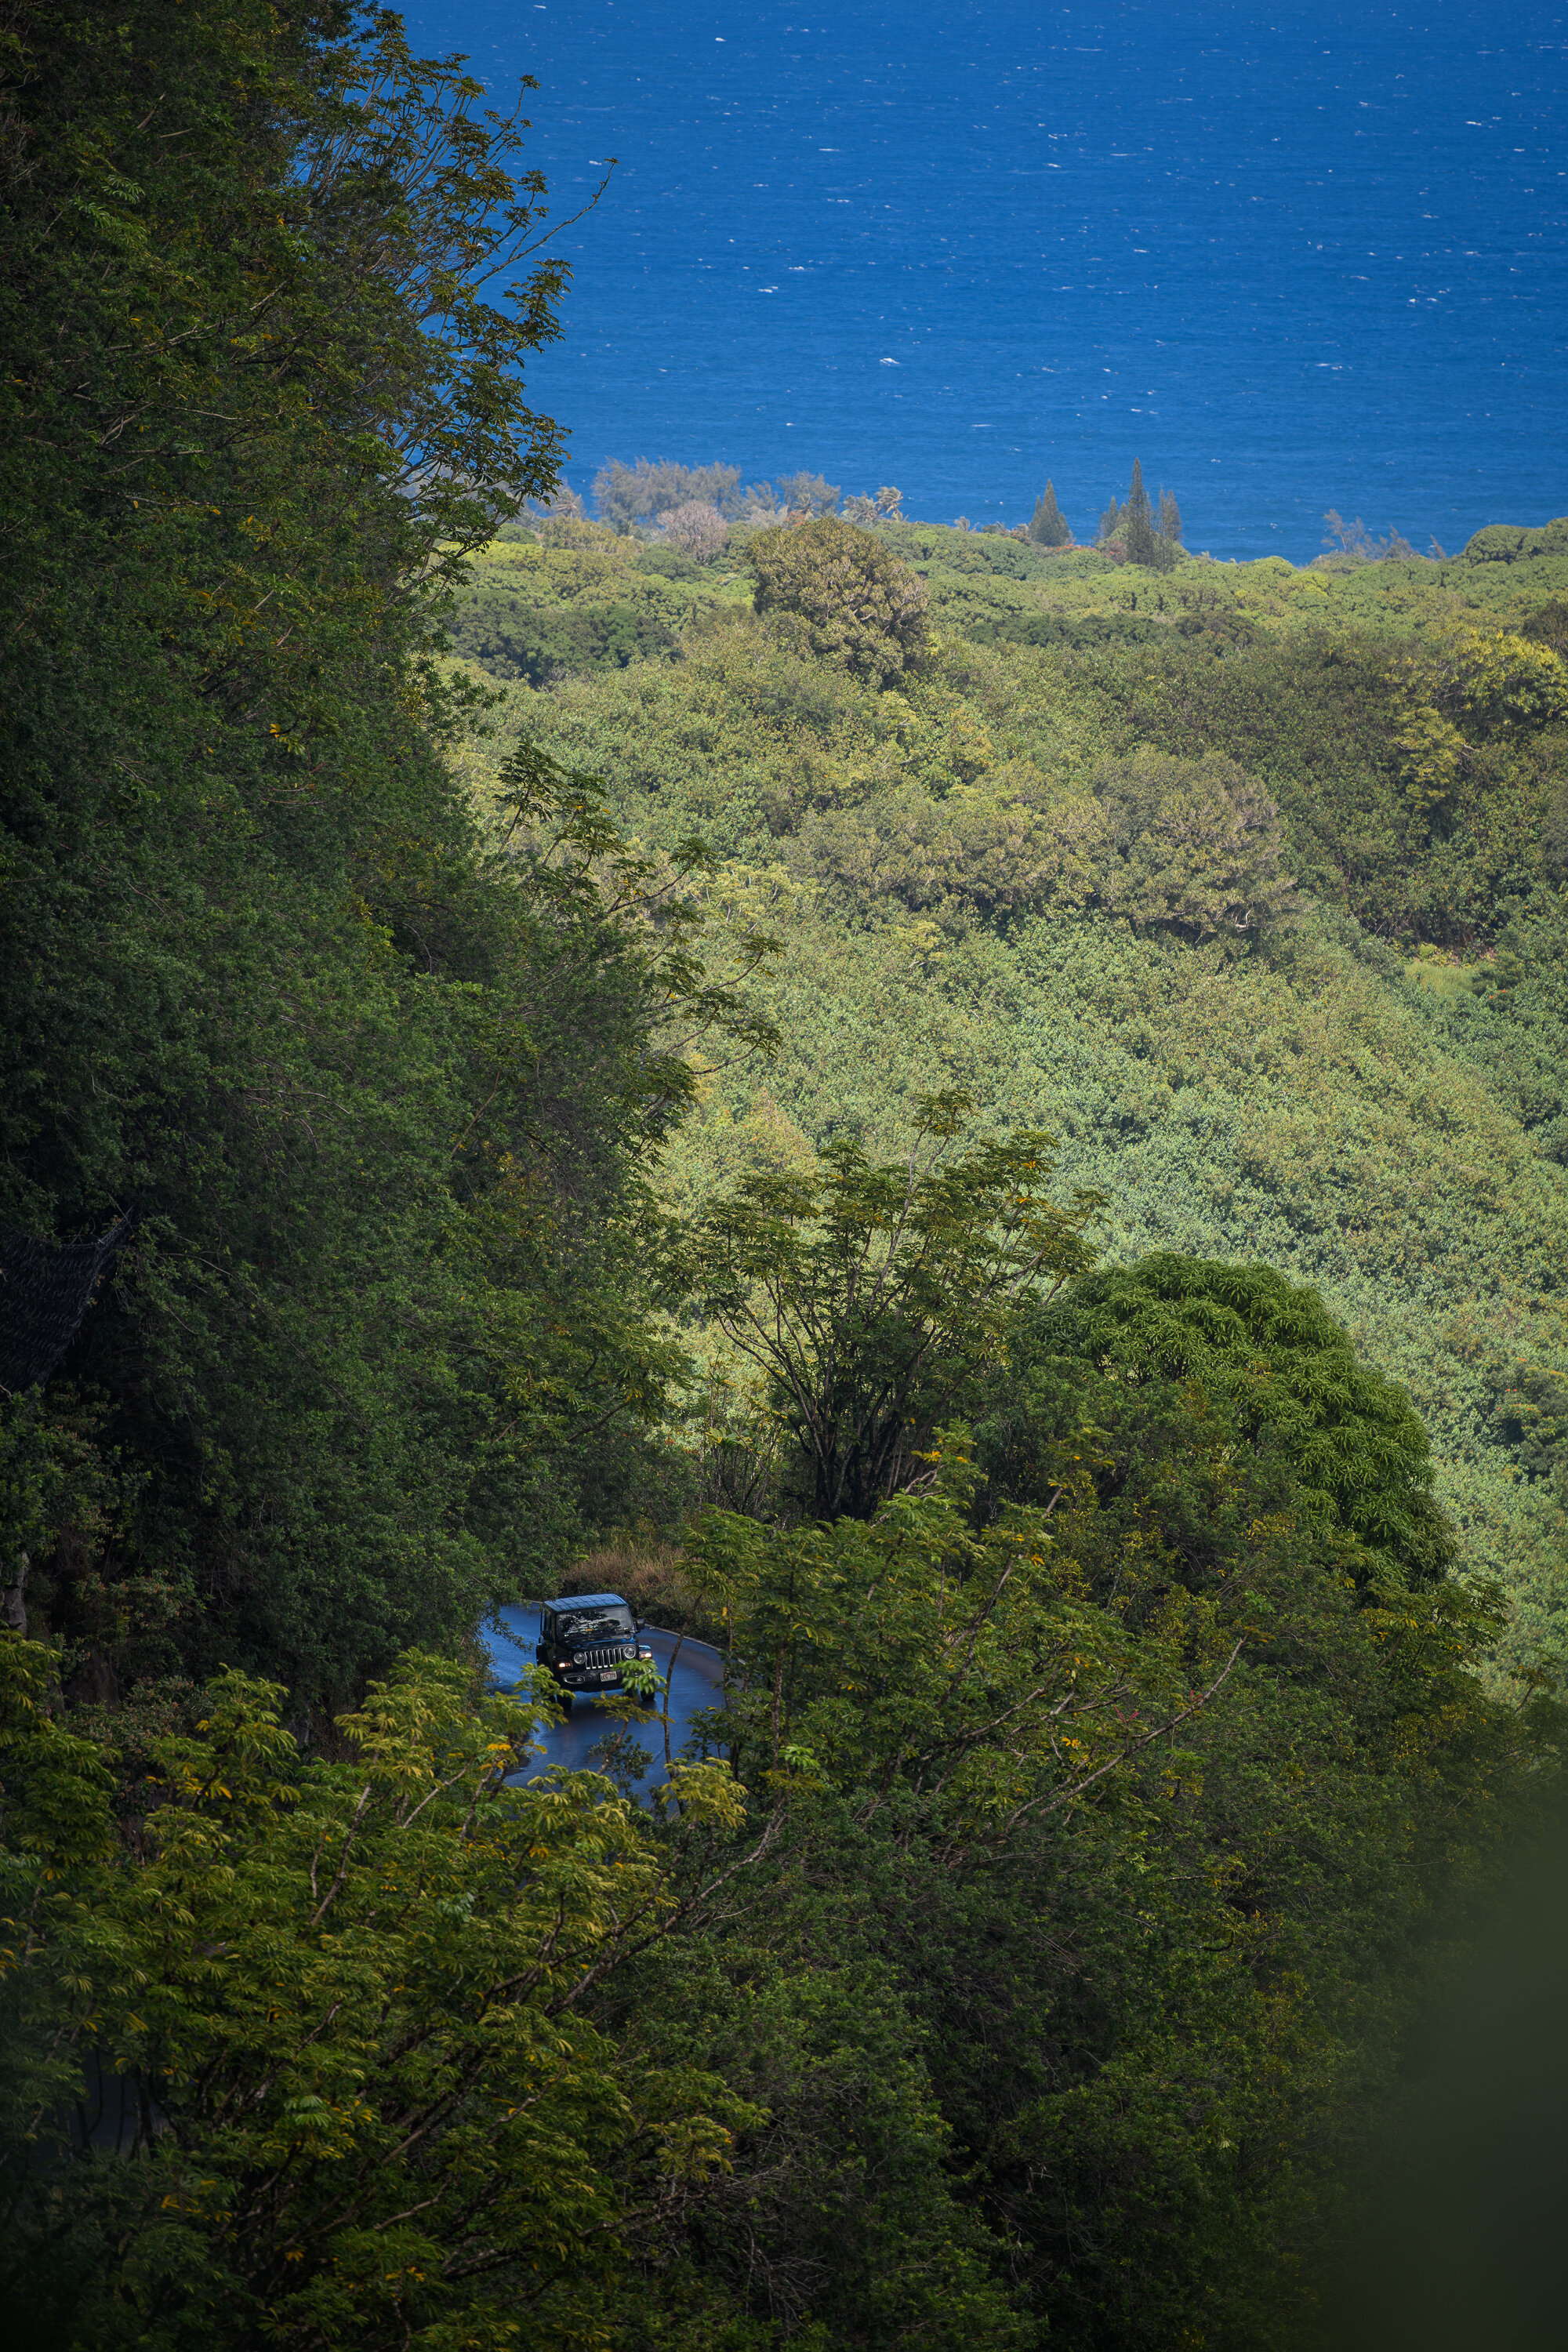 Car Upon the Cliff - Road to Hana series, 2021